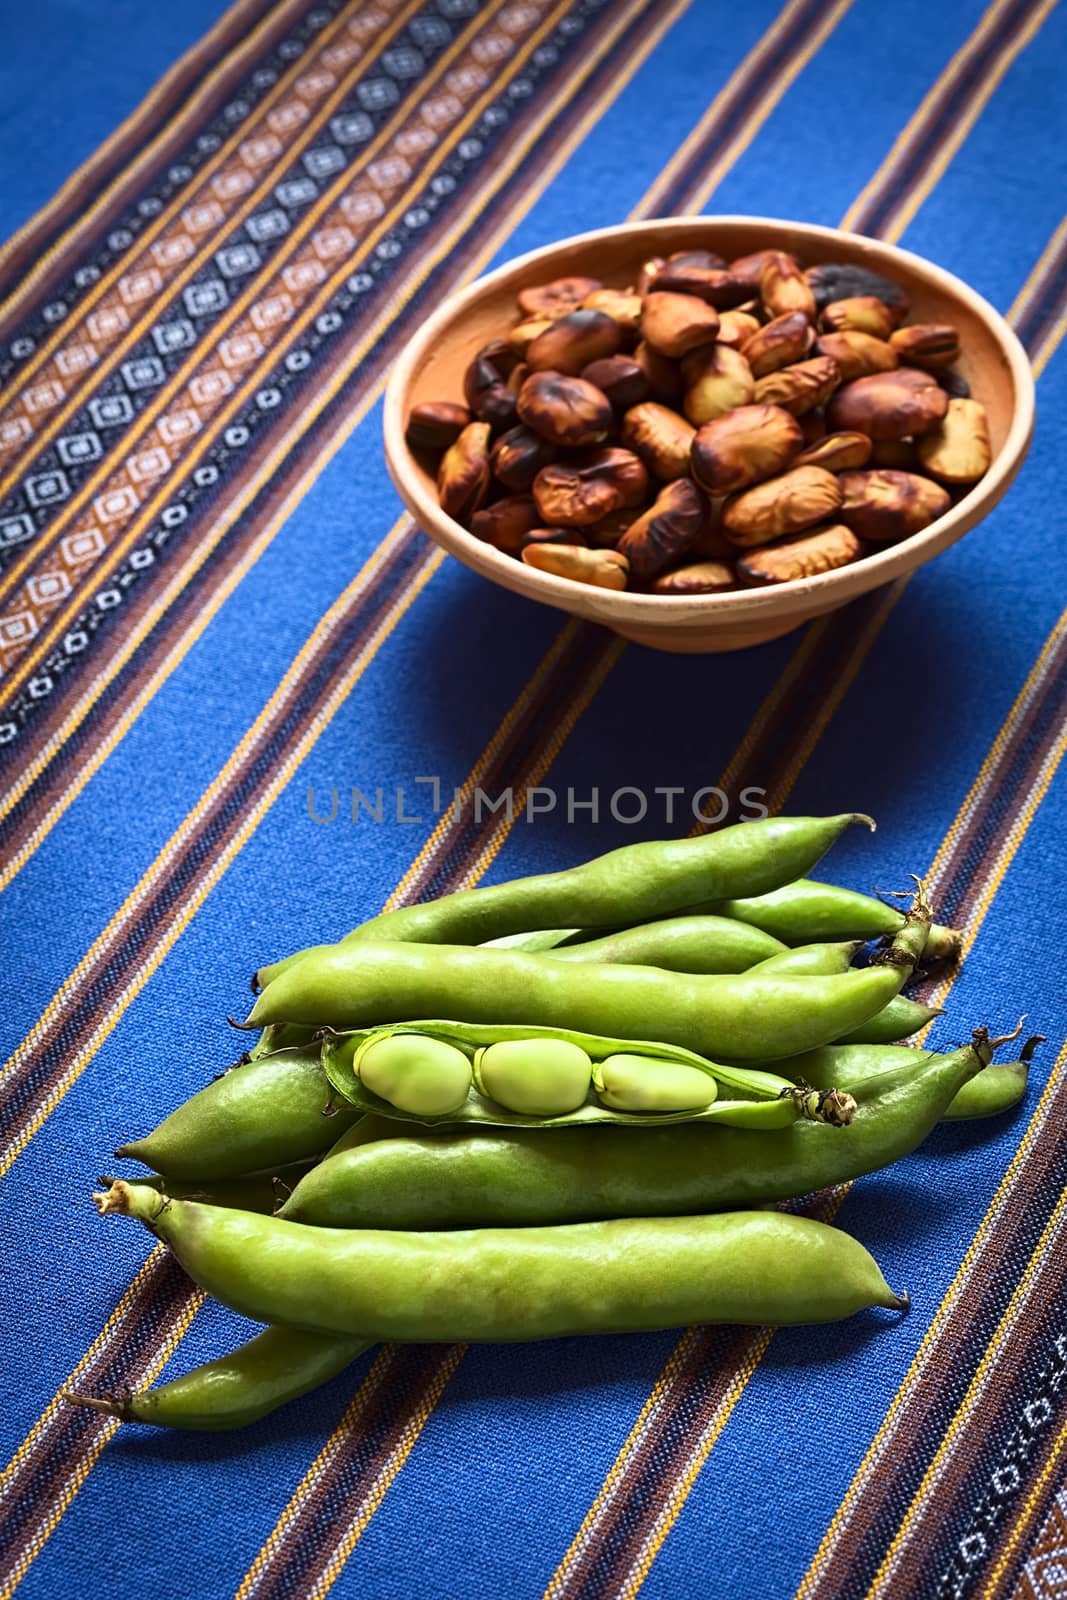 Fresh raw fava beans (lat. Vicia faba, South America: haba) with roasted habas in the back, photographed with natural light (Selective Focus, Focus on the open bean pod) 